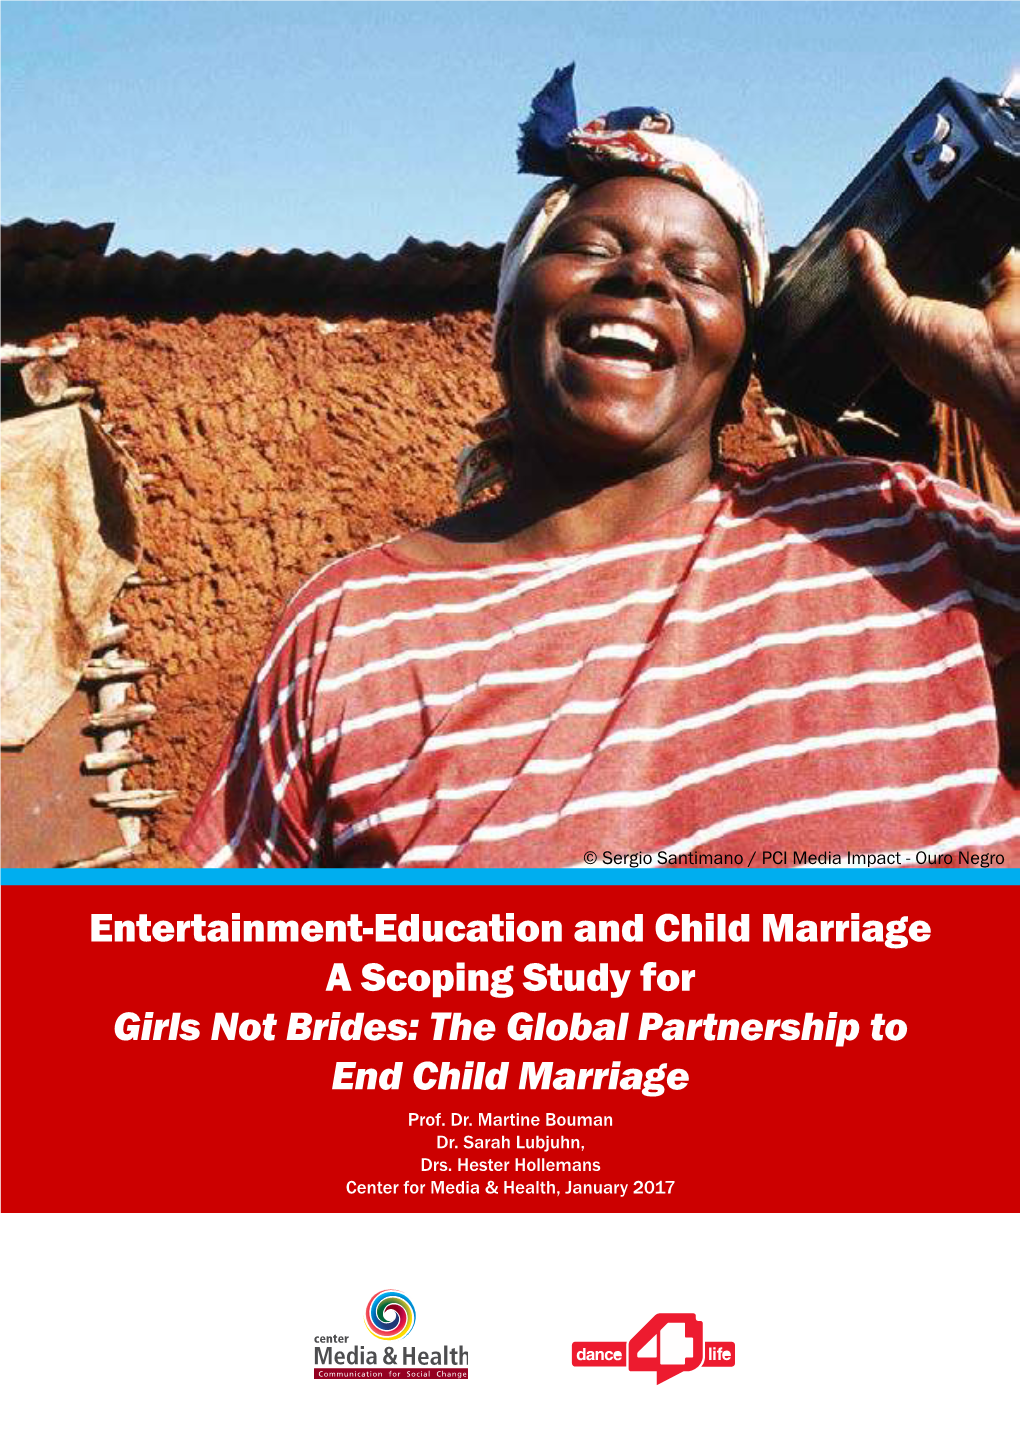 Entertainment-Education and Child Marriage a Scoping Study for Girls Not Brides: the Global Partnership to End Child Marriage Prof